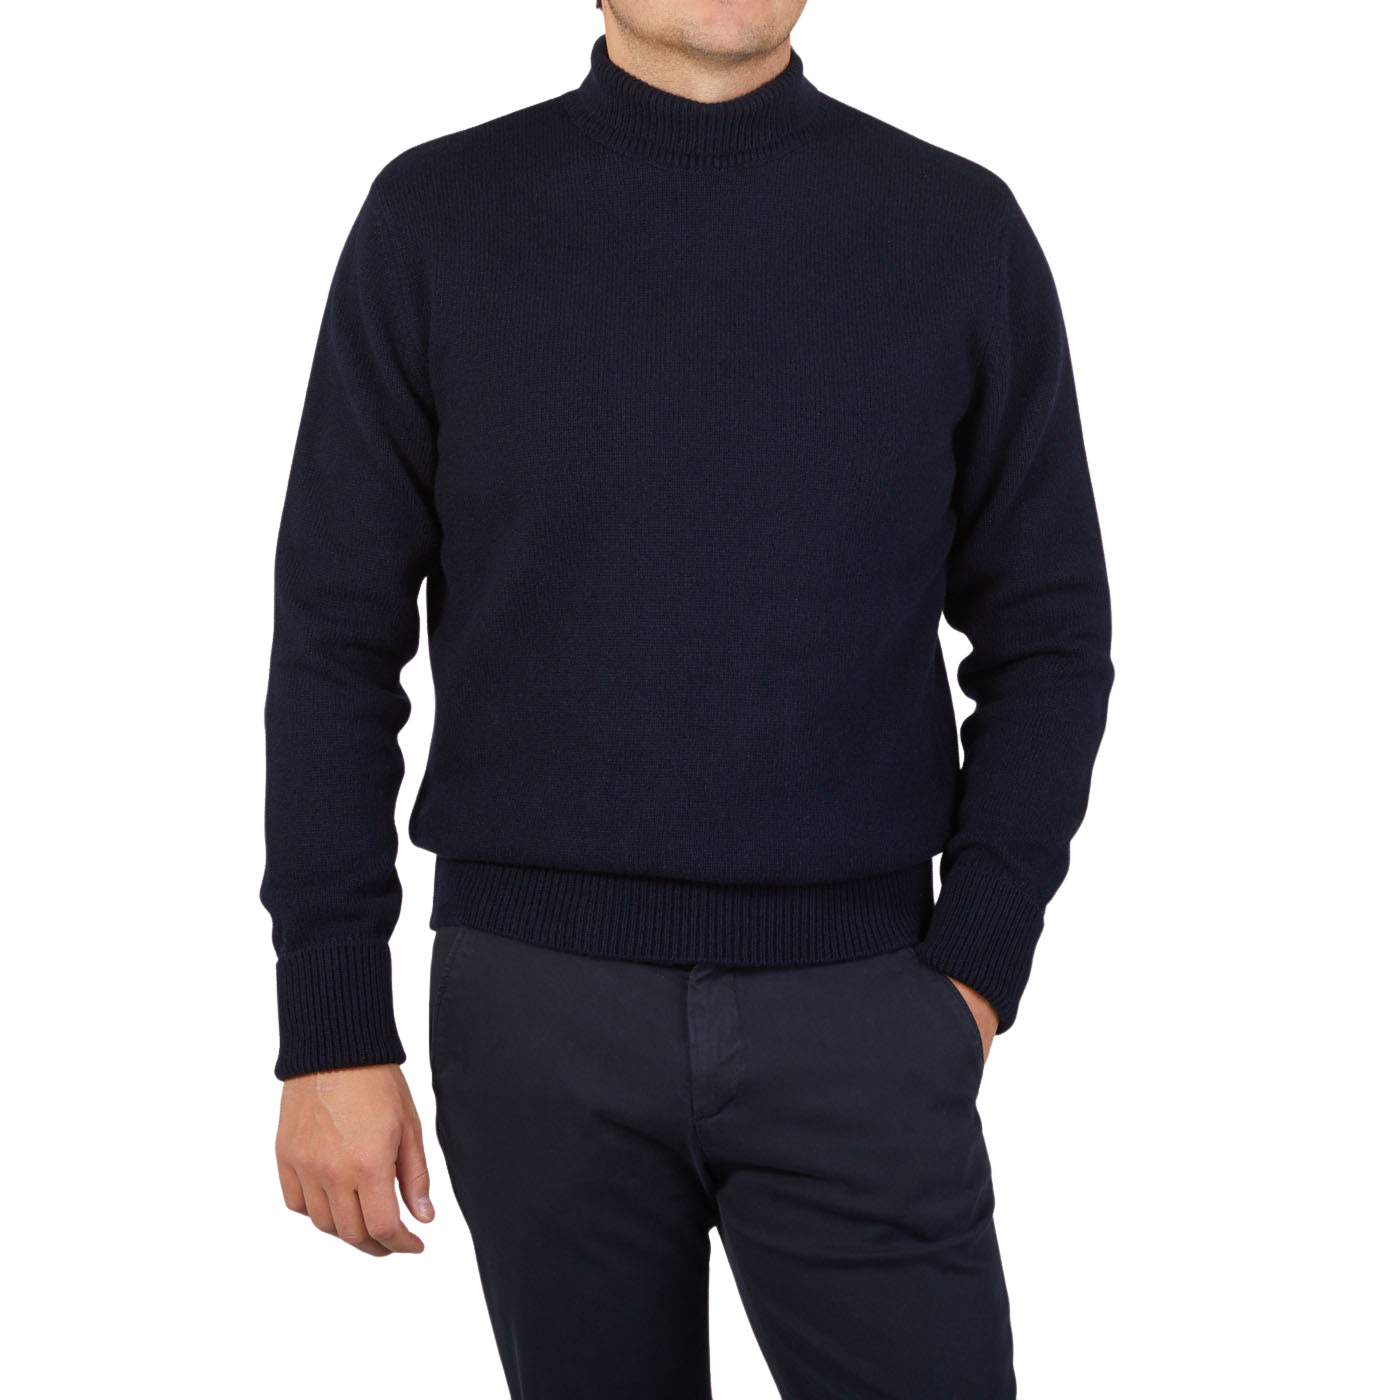 G.R.P Navy Blue Wool Cashmere Mock Neck Sweater Front